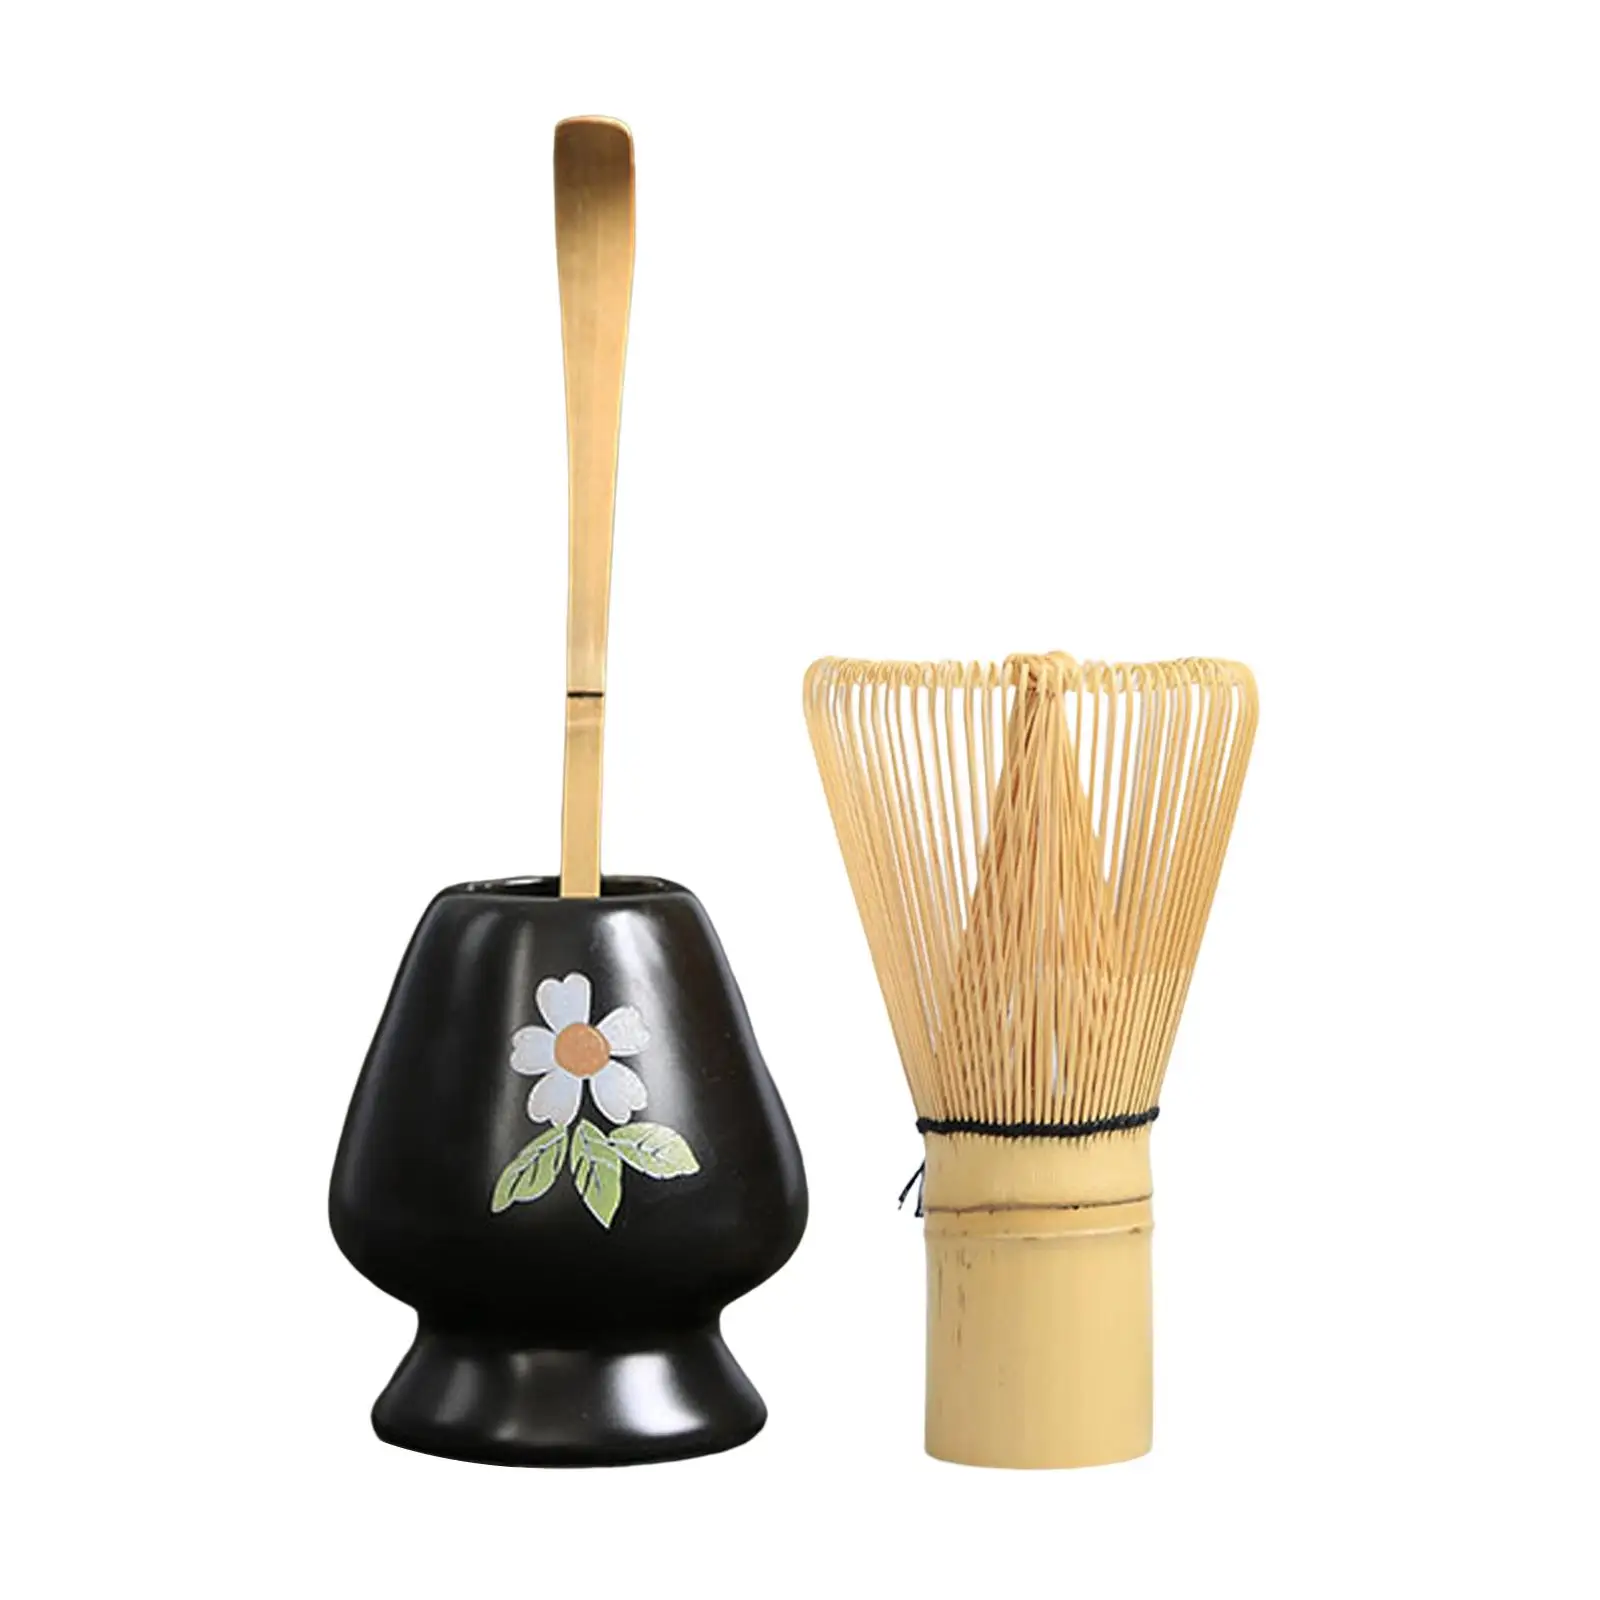 3x Matcha Ceremony Set with Tea Spoon Handmade Bamboo Whisk Matcha Whisk and Bowl for Japanese Matcha Preparation Best Gift